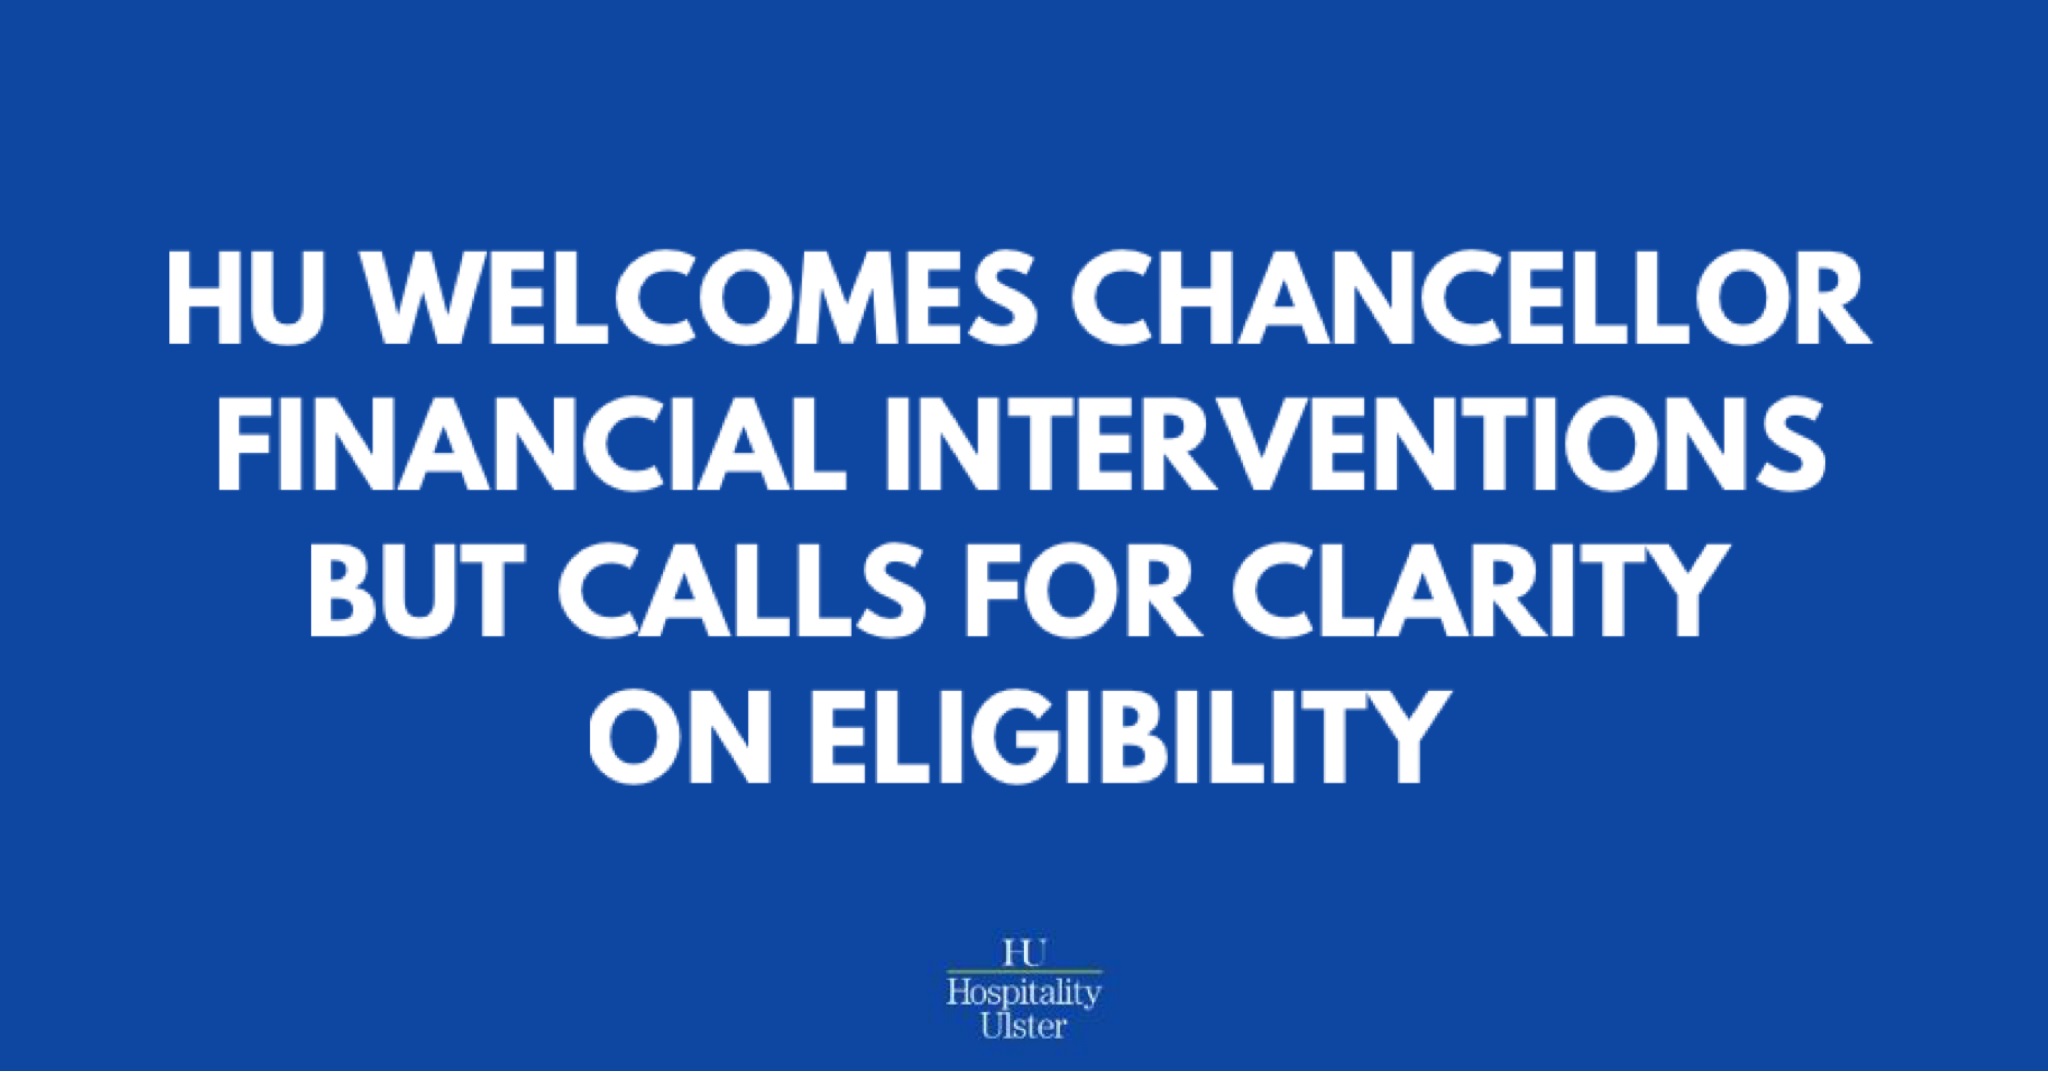 HU WELCOMES CHANCELLOR FINANCIAL INTERVENTIONS BUT CALLS FOR CLARITY ON ELIGIBILITY